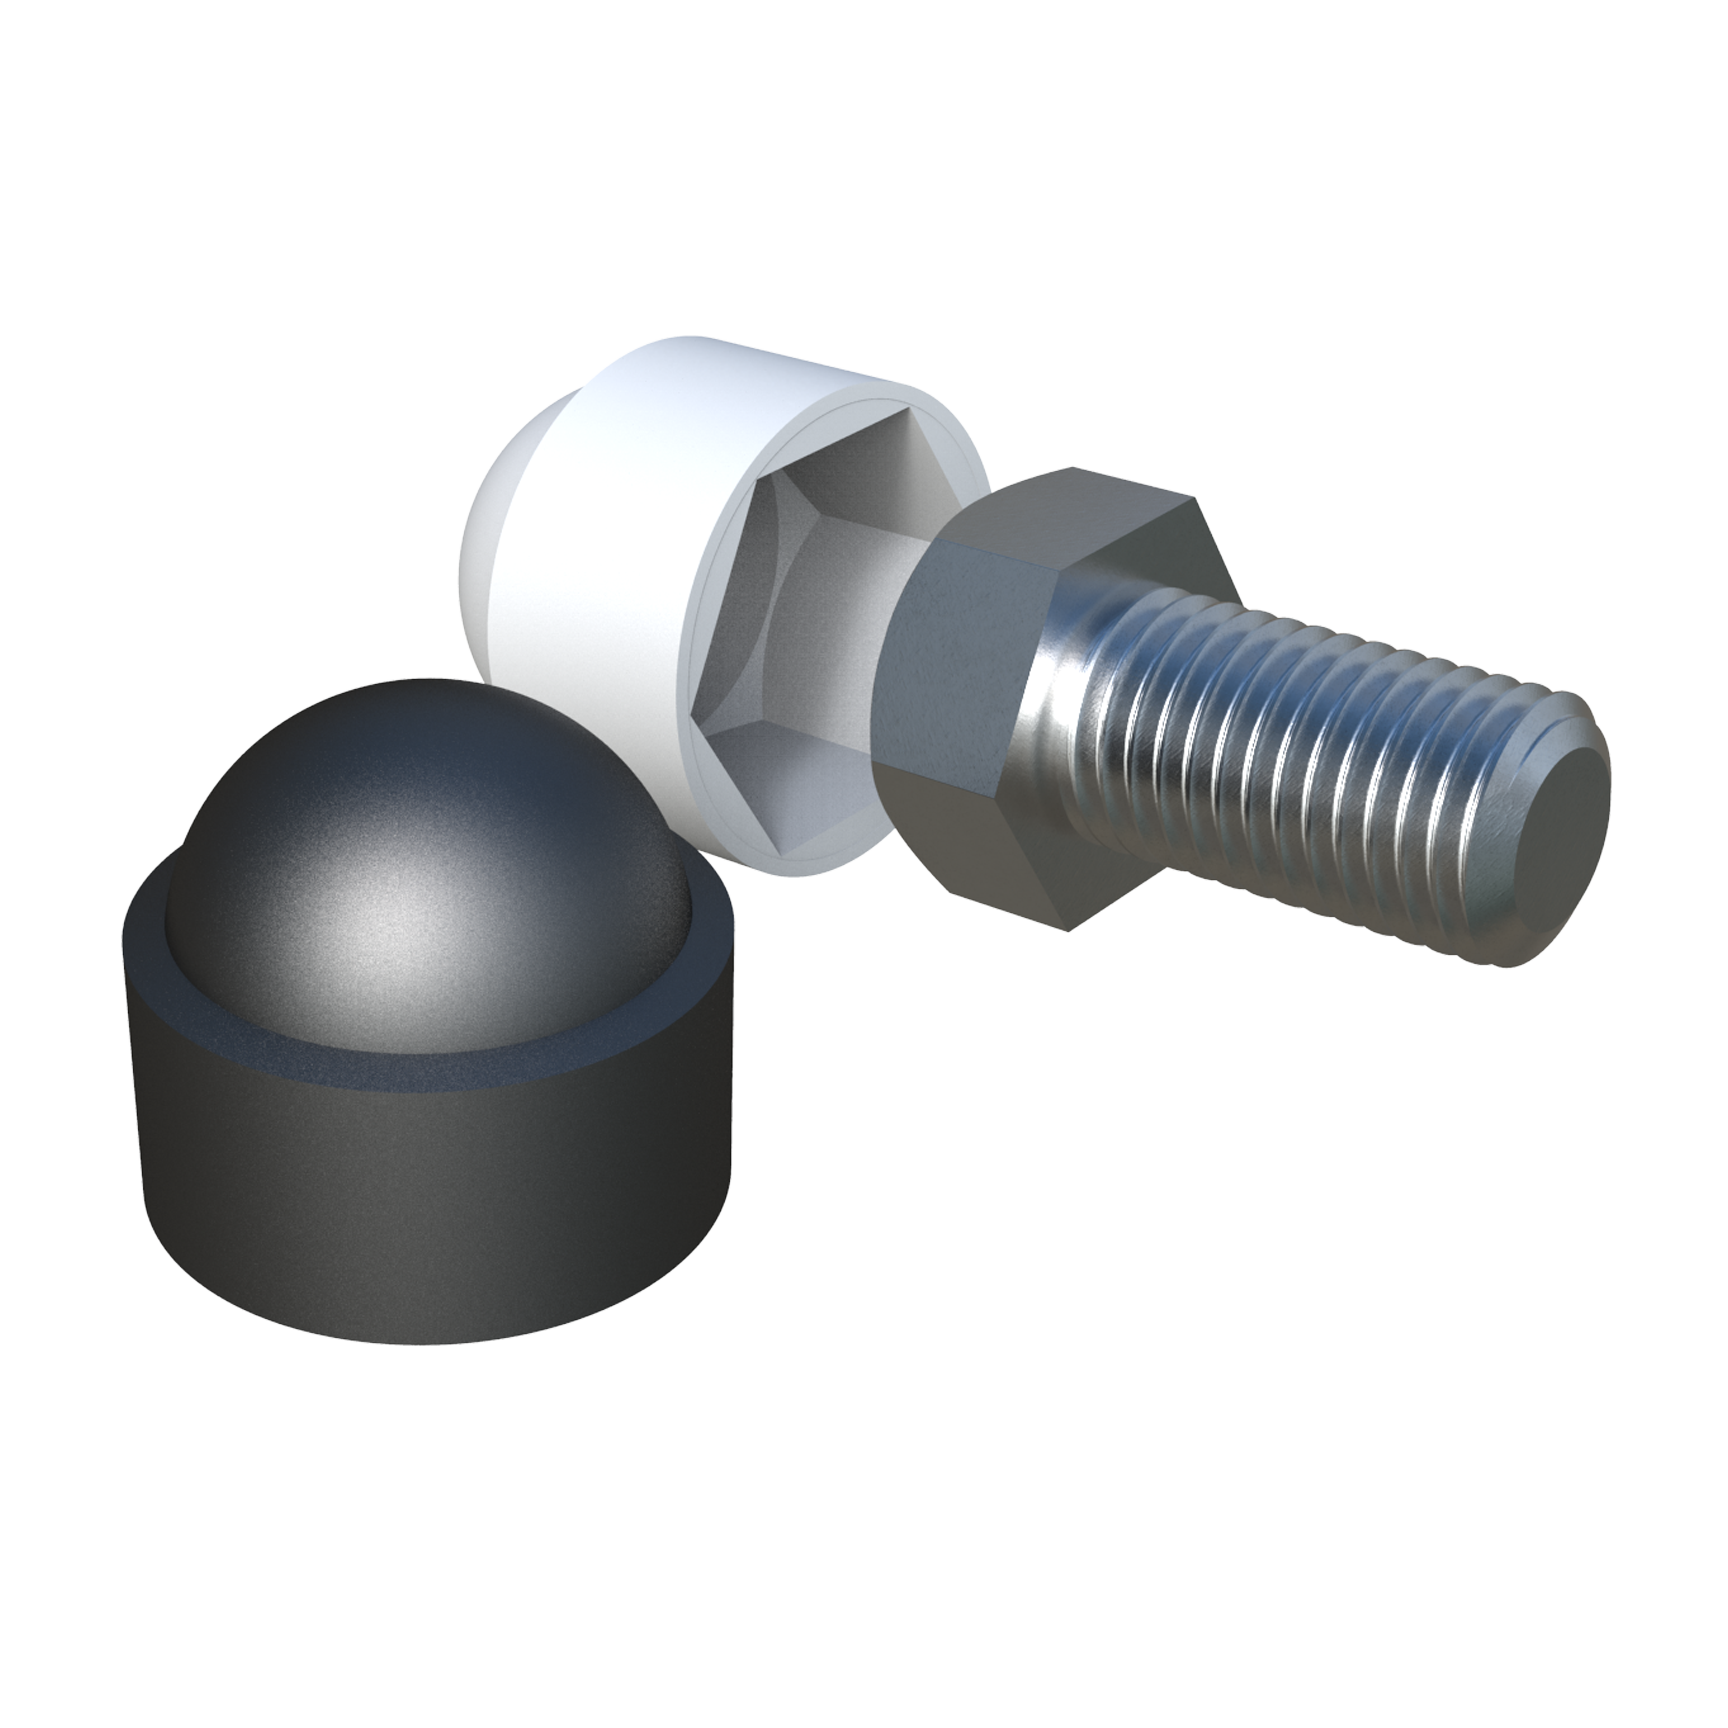 Cap for screws and hex nuts